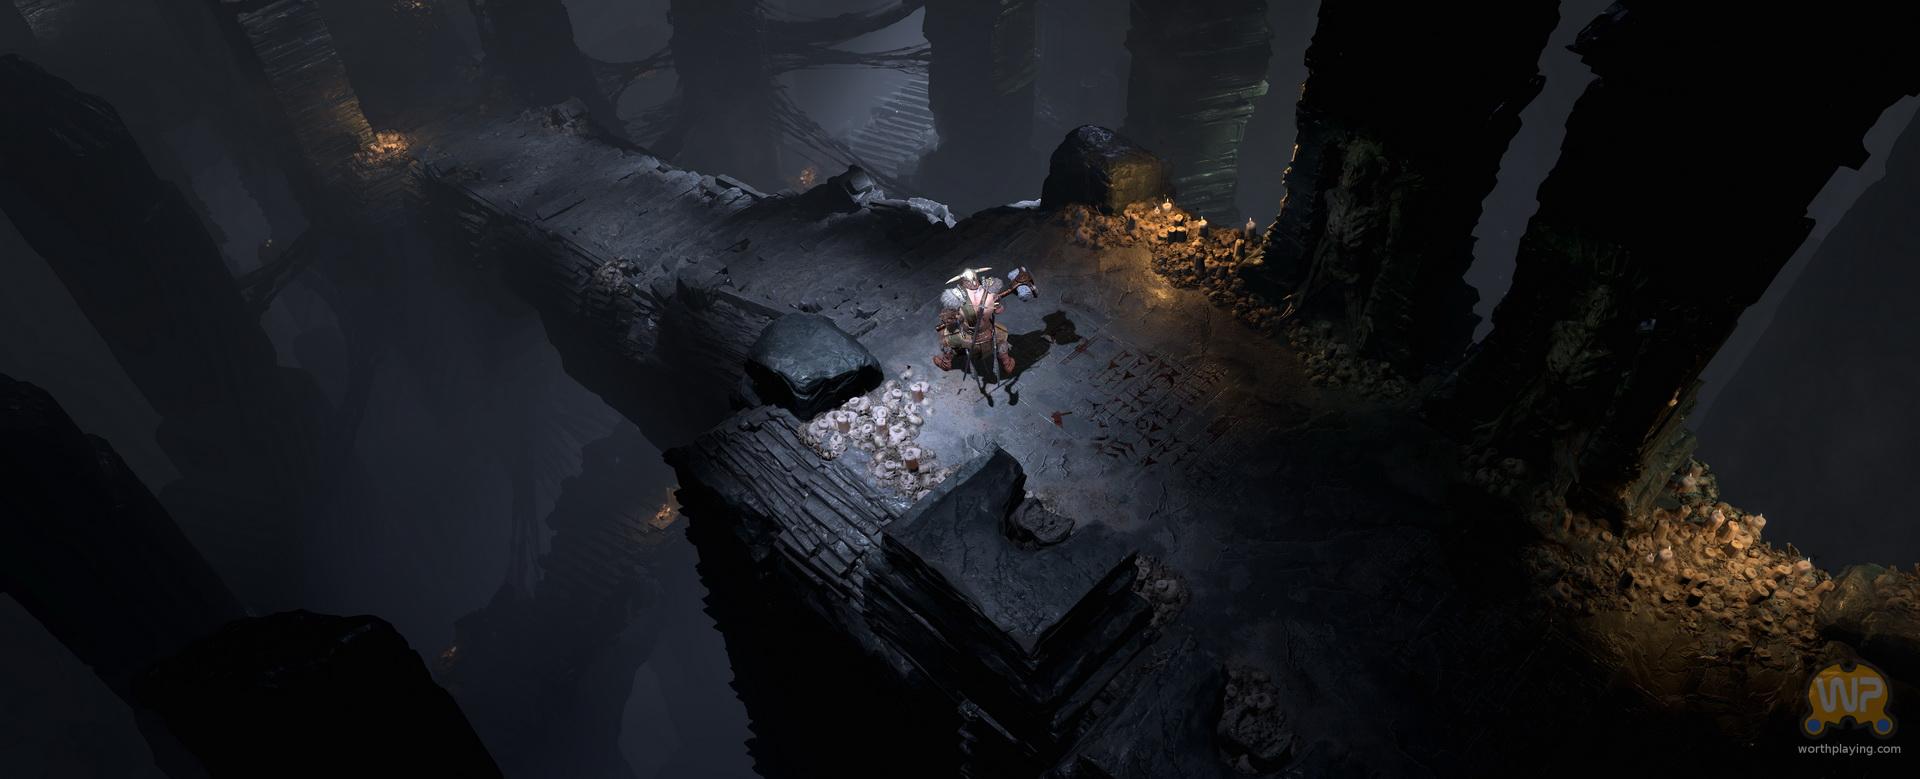 New Details About Diablo IV's Loot System Suggests it's Designed With